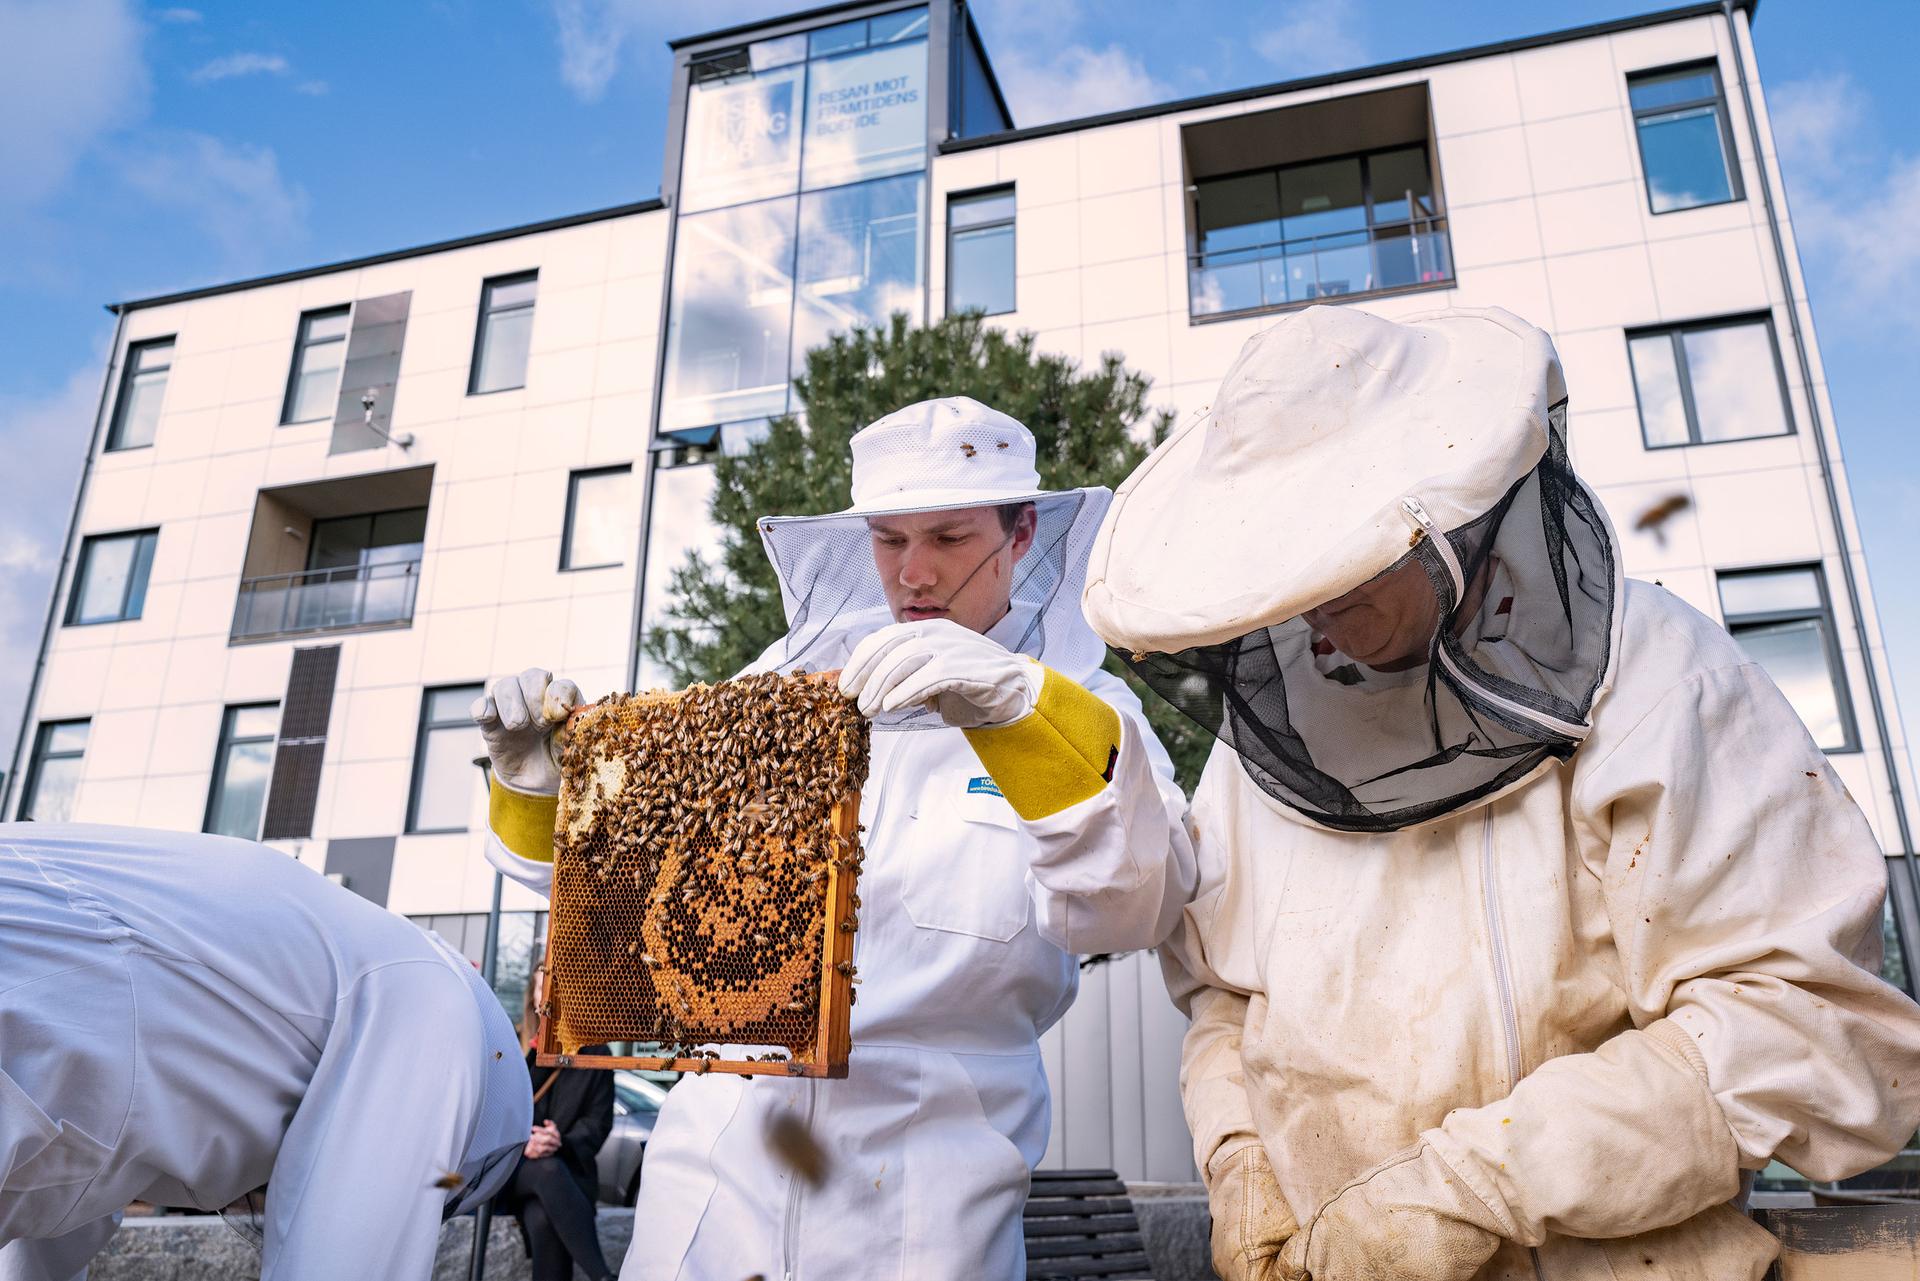 Bee keepers in protective white gear examine bees at HSB's Living Lab.